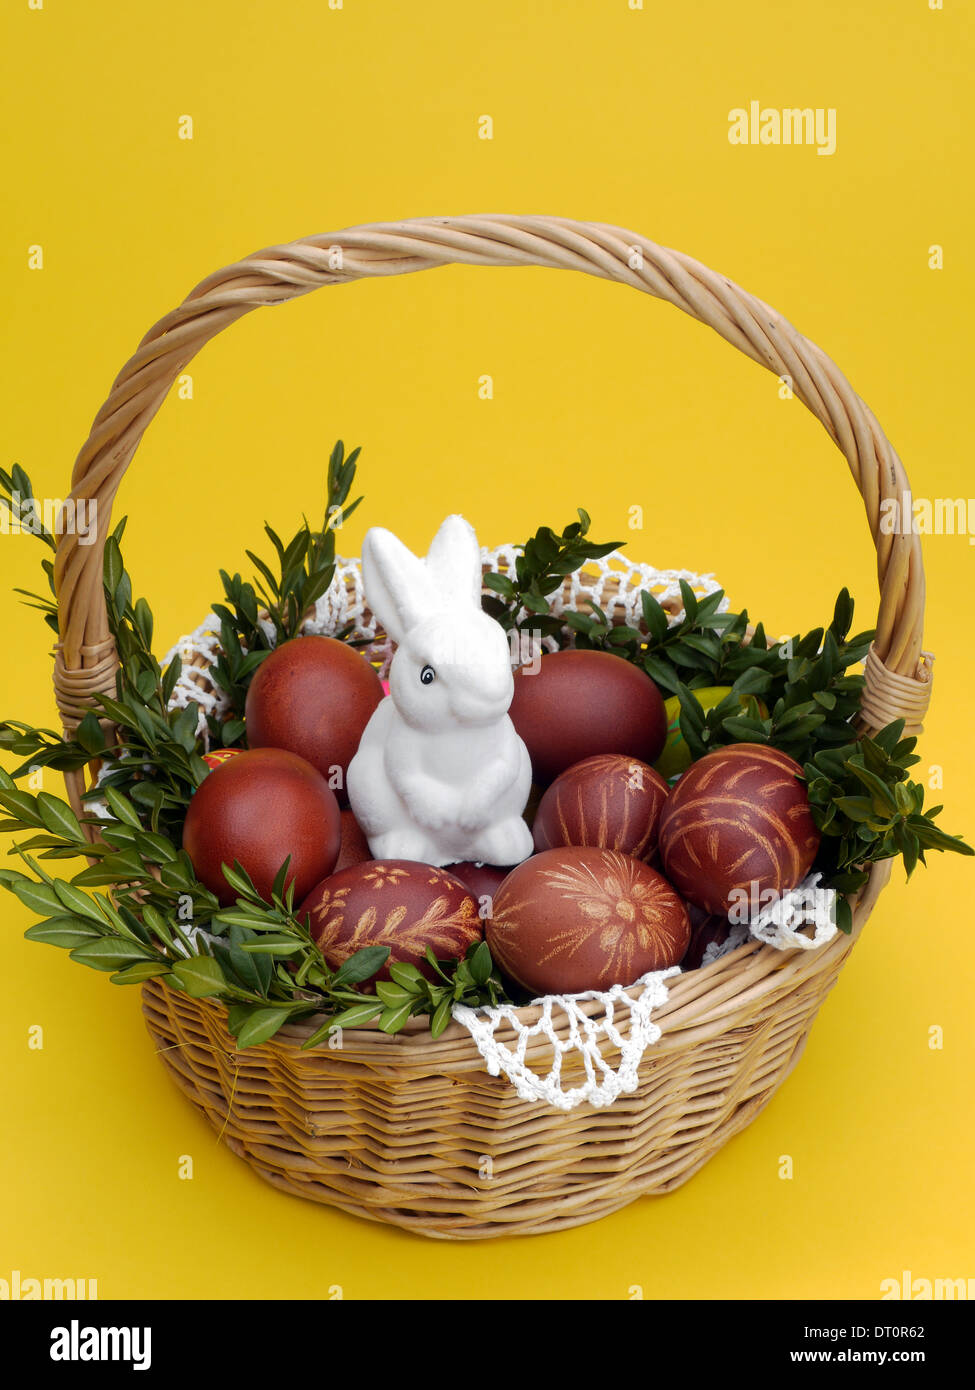 Wicker basket with easter eggs and white plush Easter bunny on yellow background Stock Photo